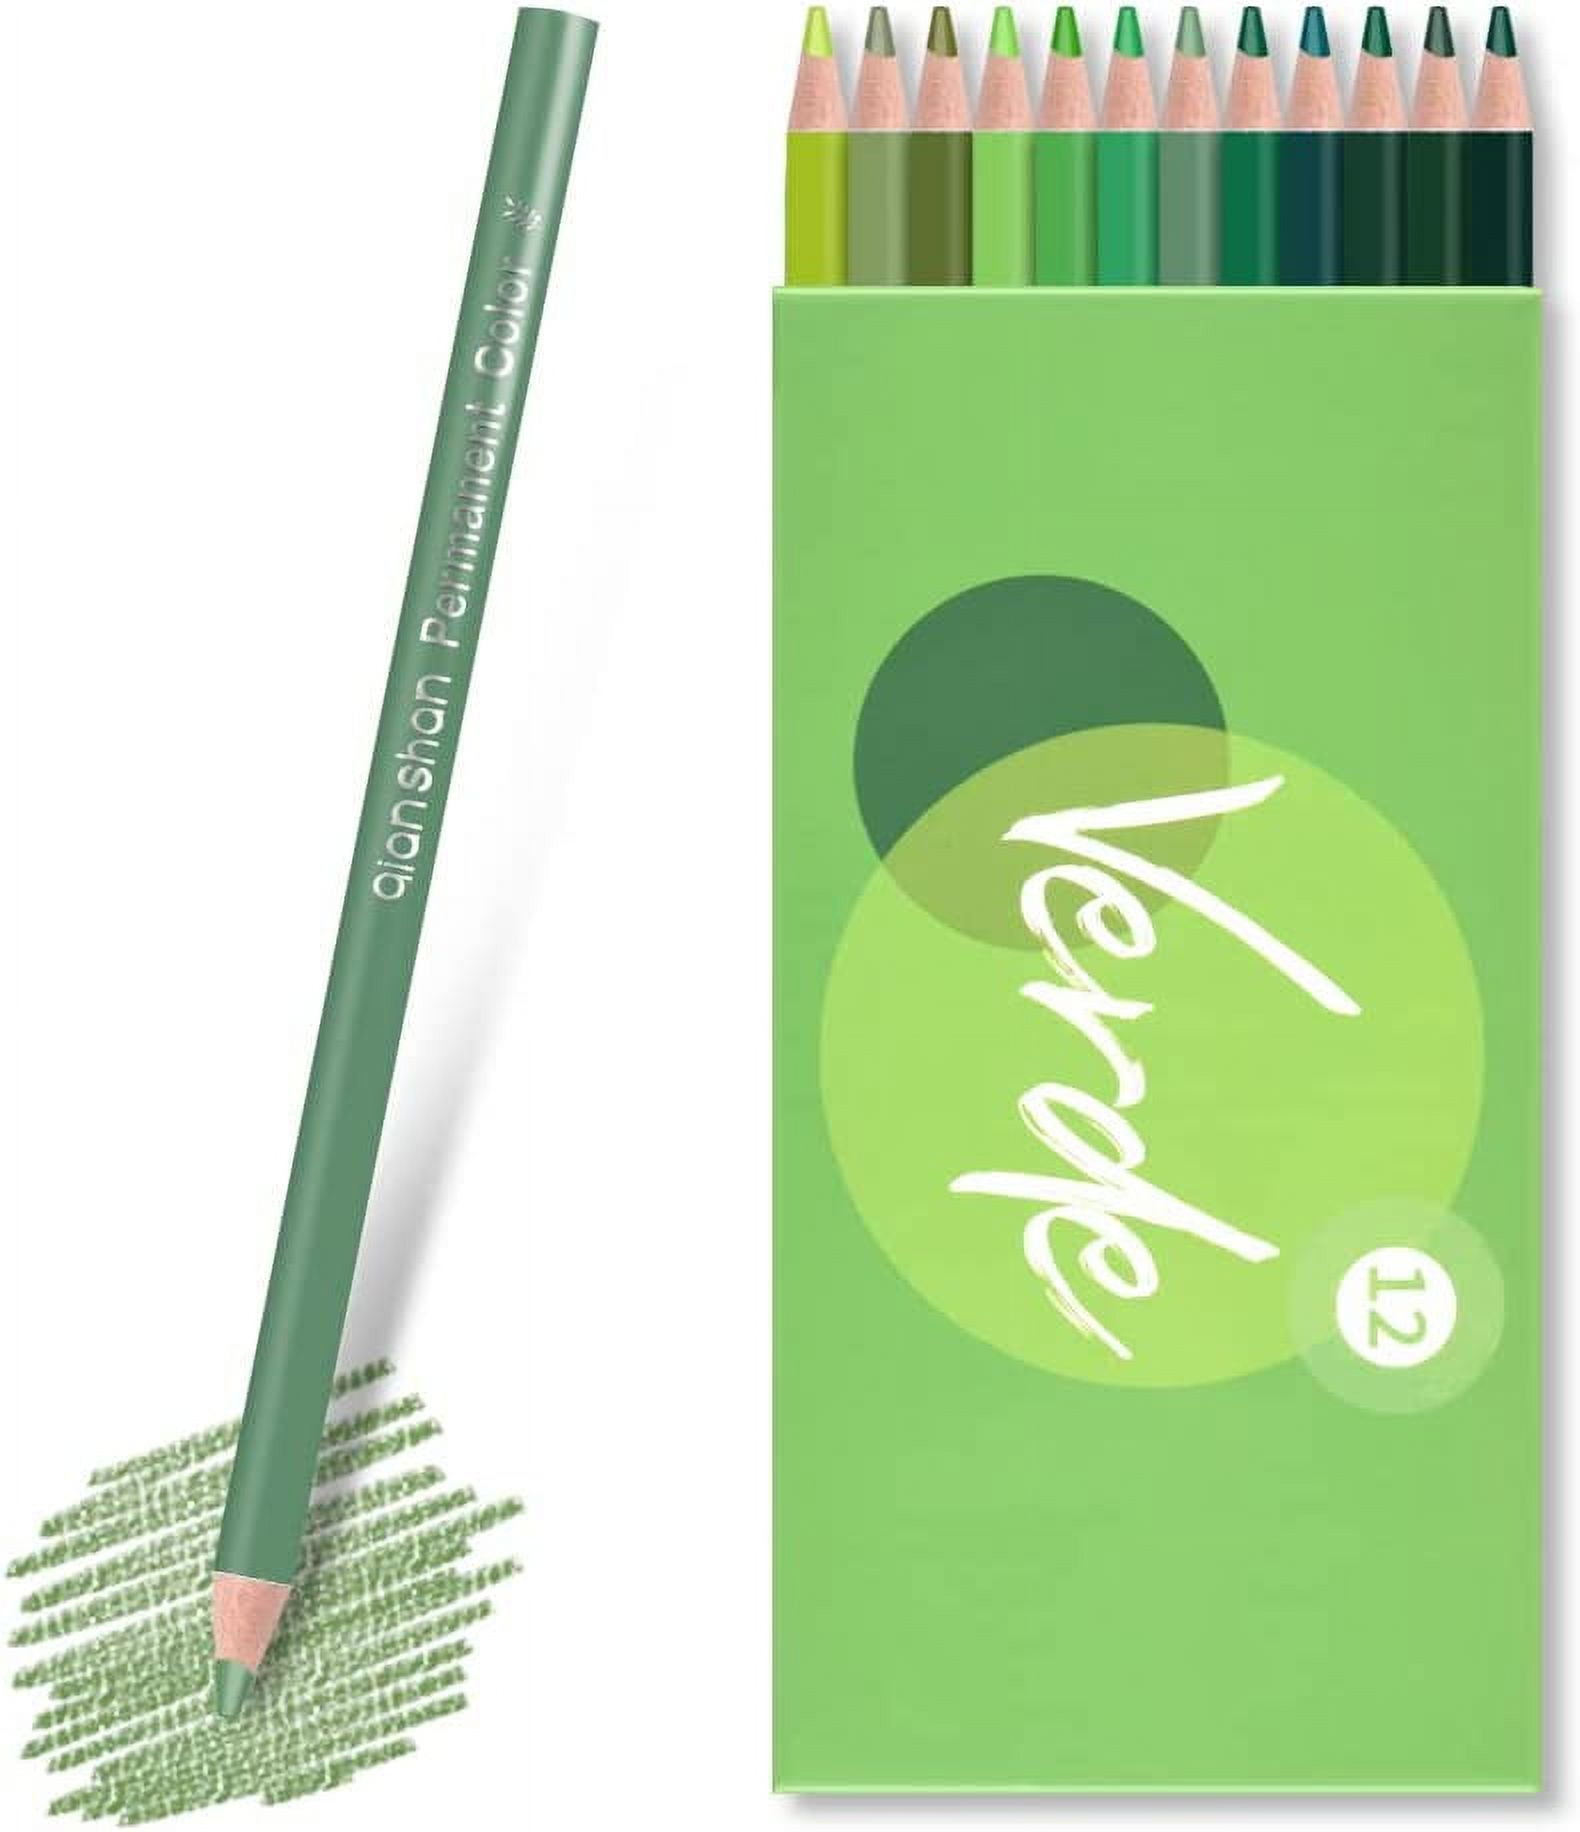 Buy 36 Blue and Green Colored Pencils Presharpened, Some Used Unused,  Vintage Drawing Pencils, Assorted Shades and Makers, Sketch Coloring Online  in India 